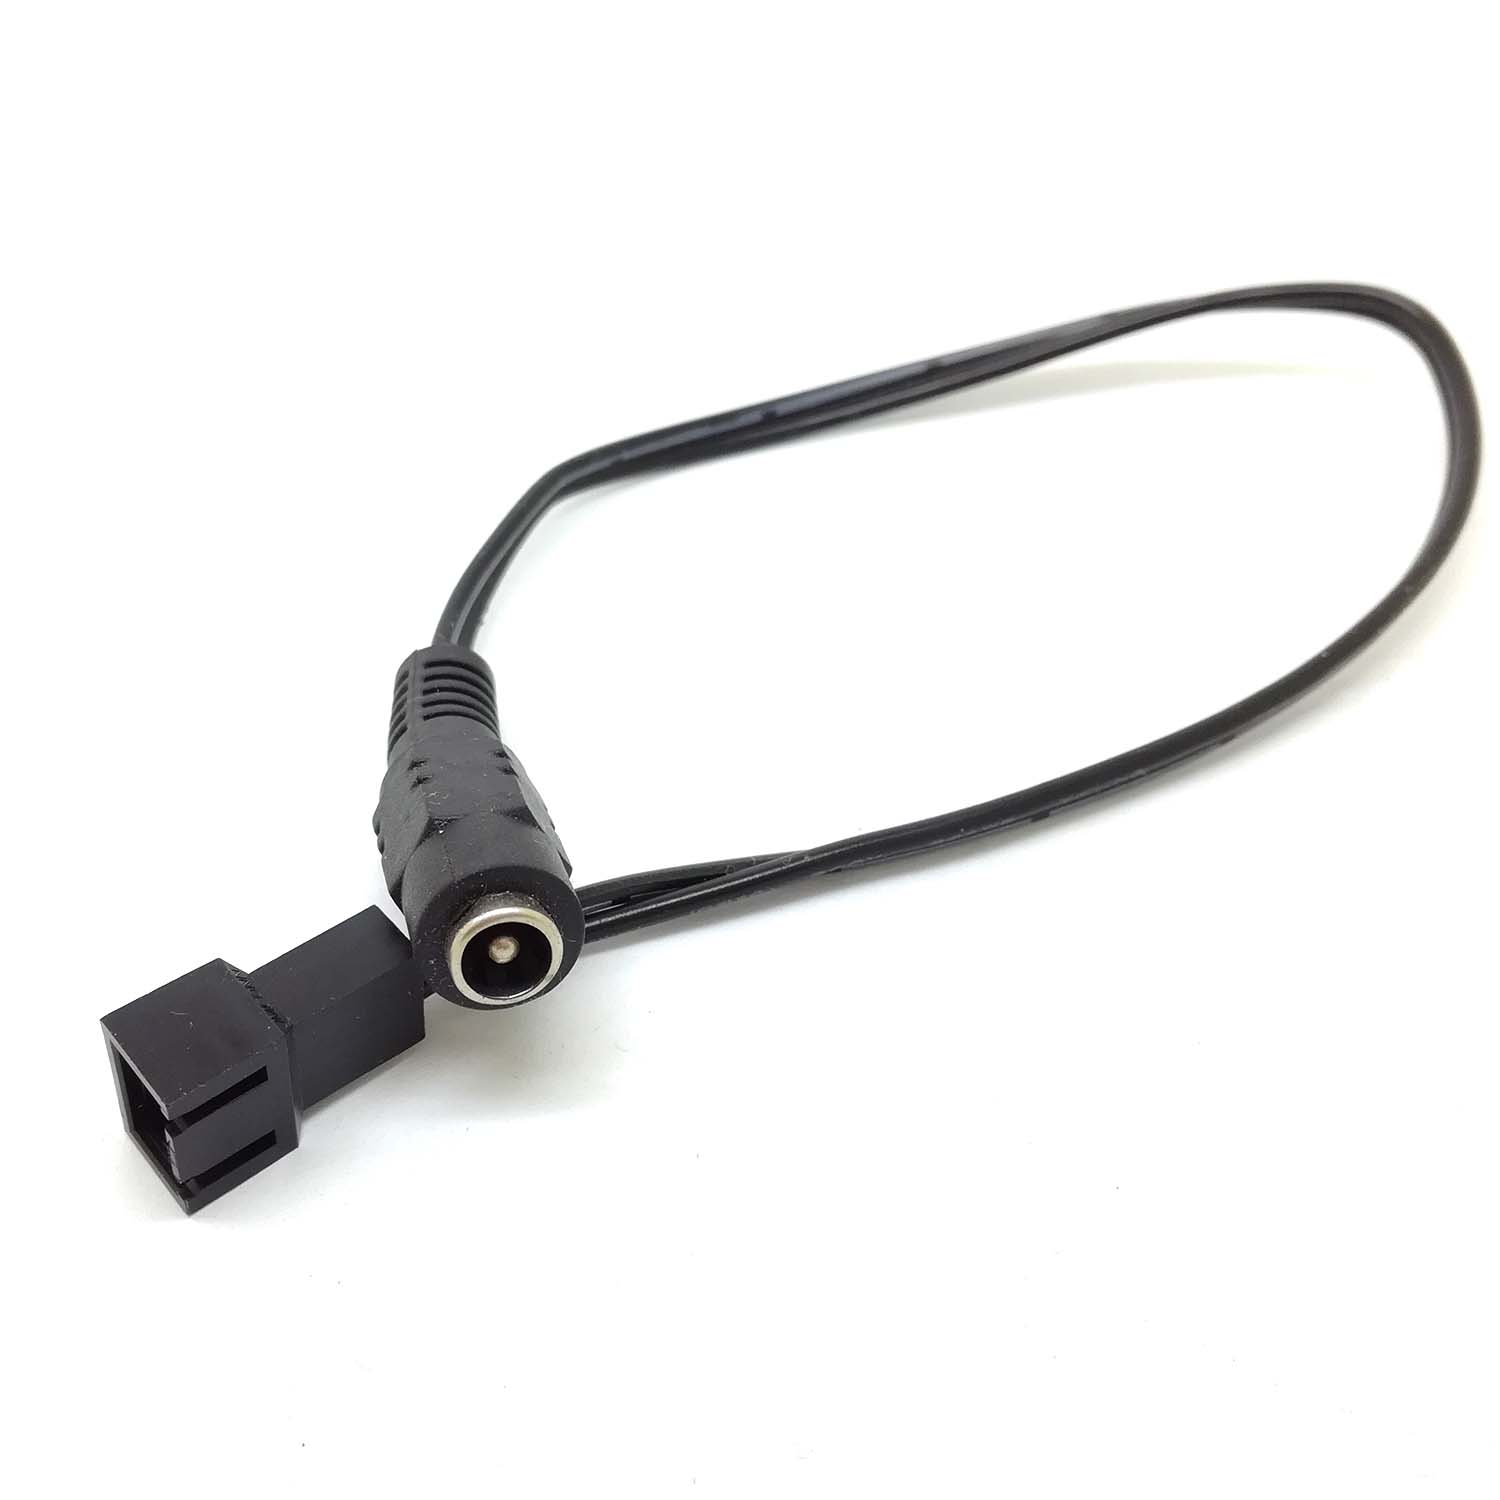 PC 3pin/2pin fans male to 5.5x2.1mm female DC Power cable 12v 9v 5v fan Route adapter convertor cord